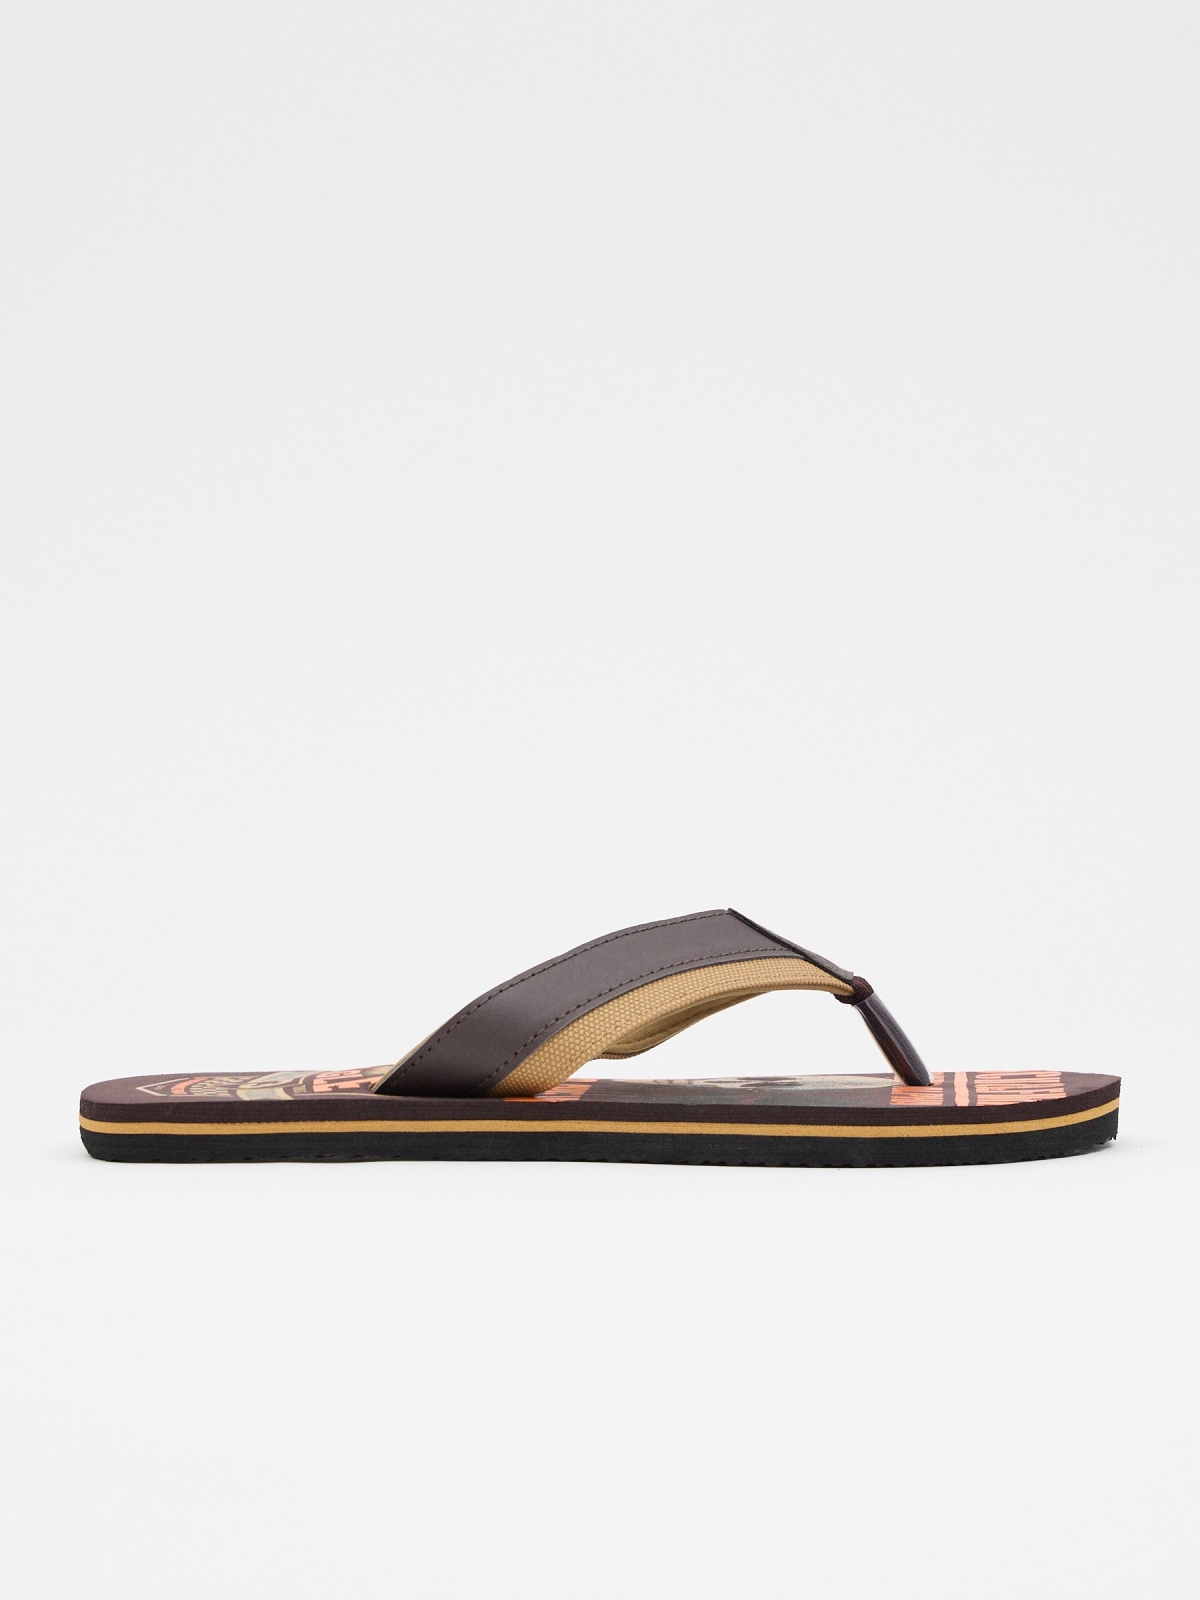 Patent leather thong sandal earth brown lateral view